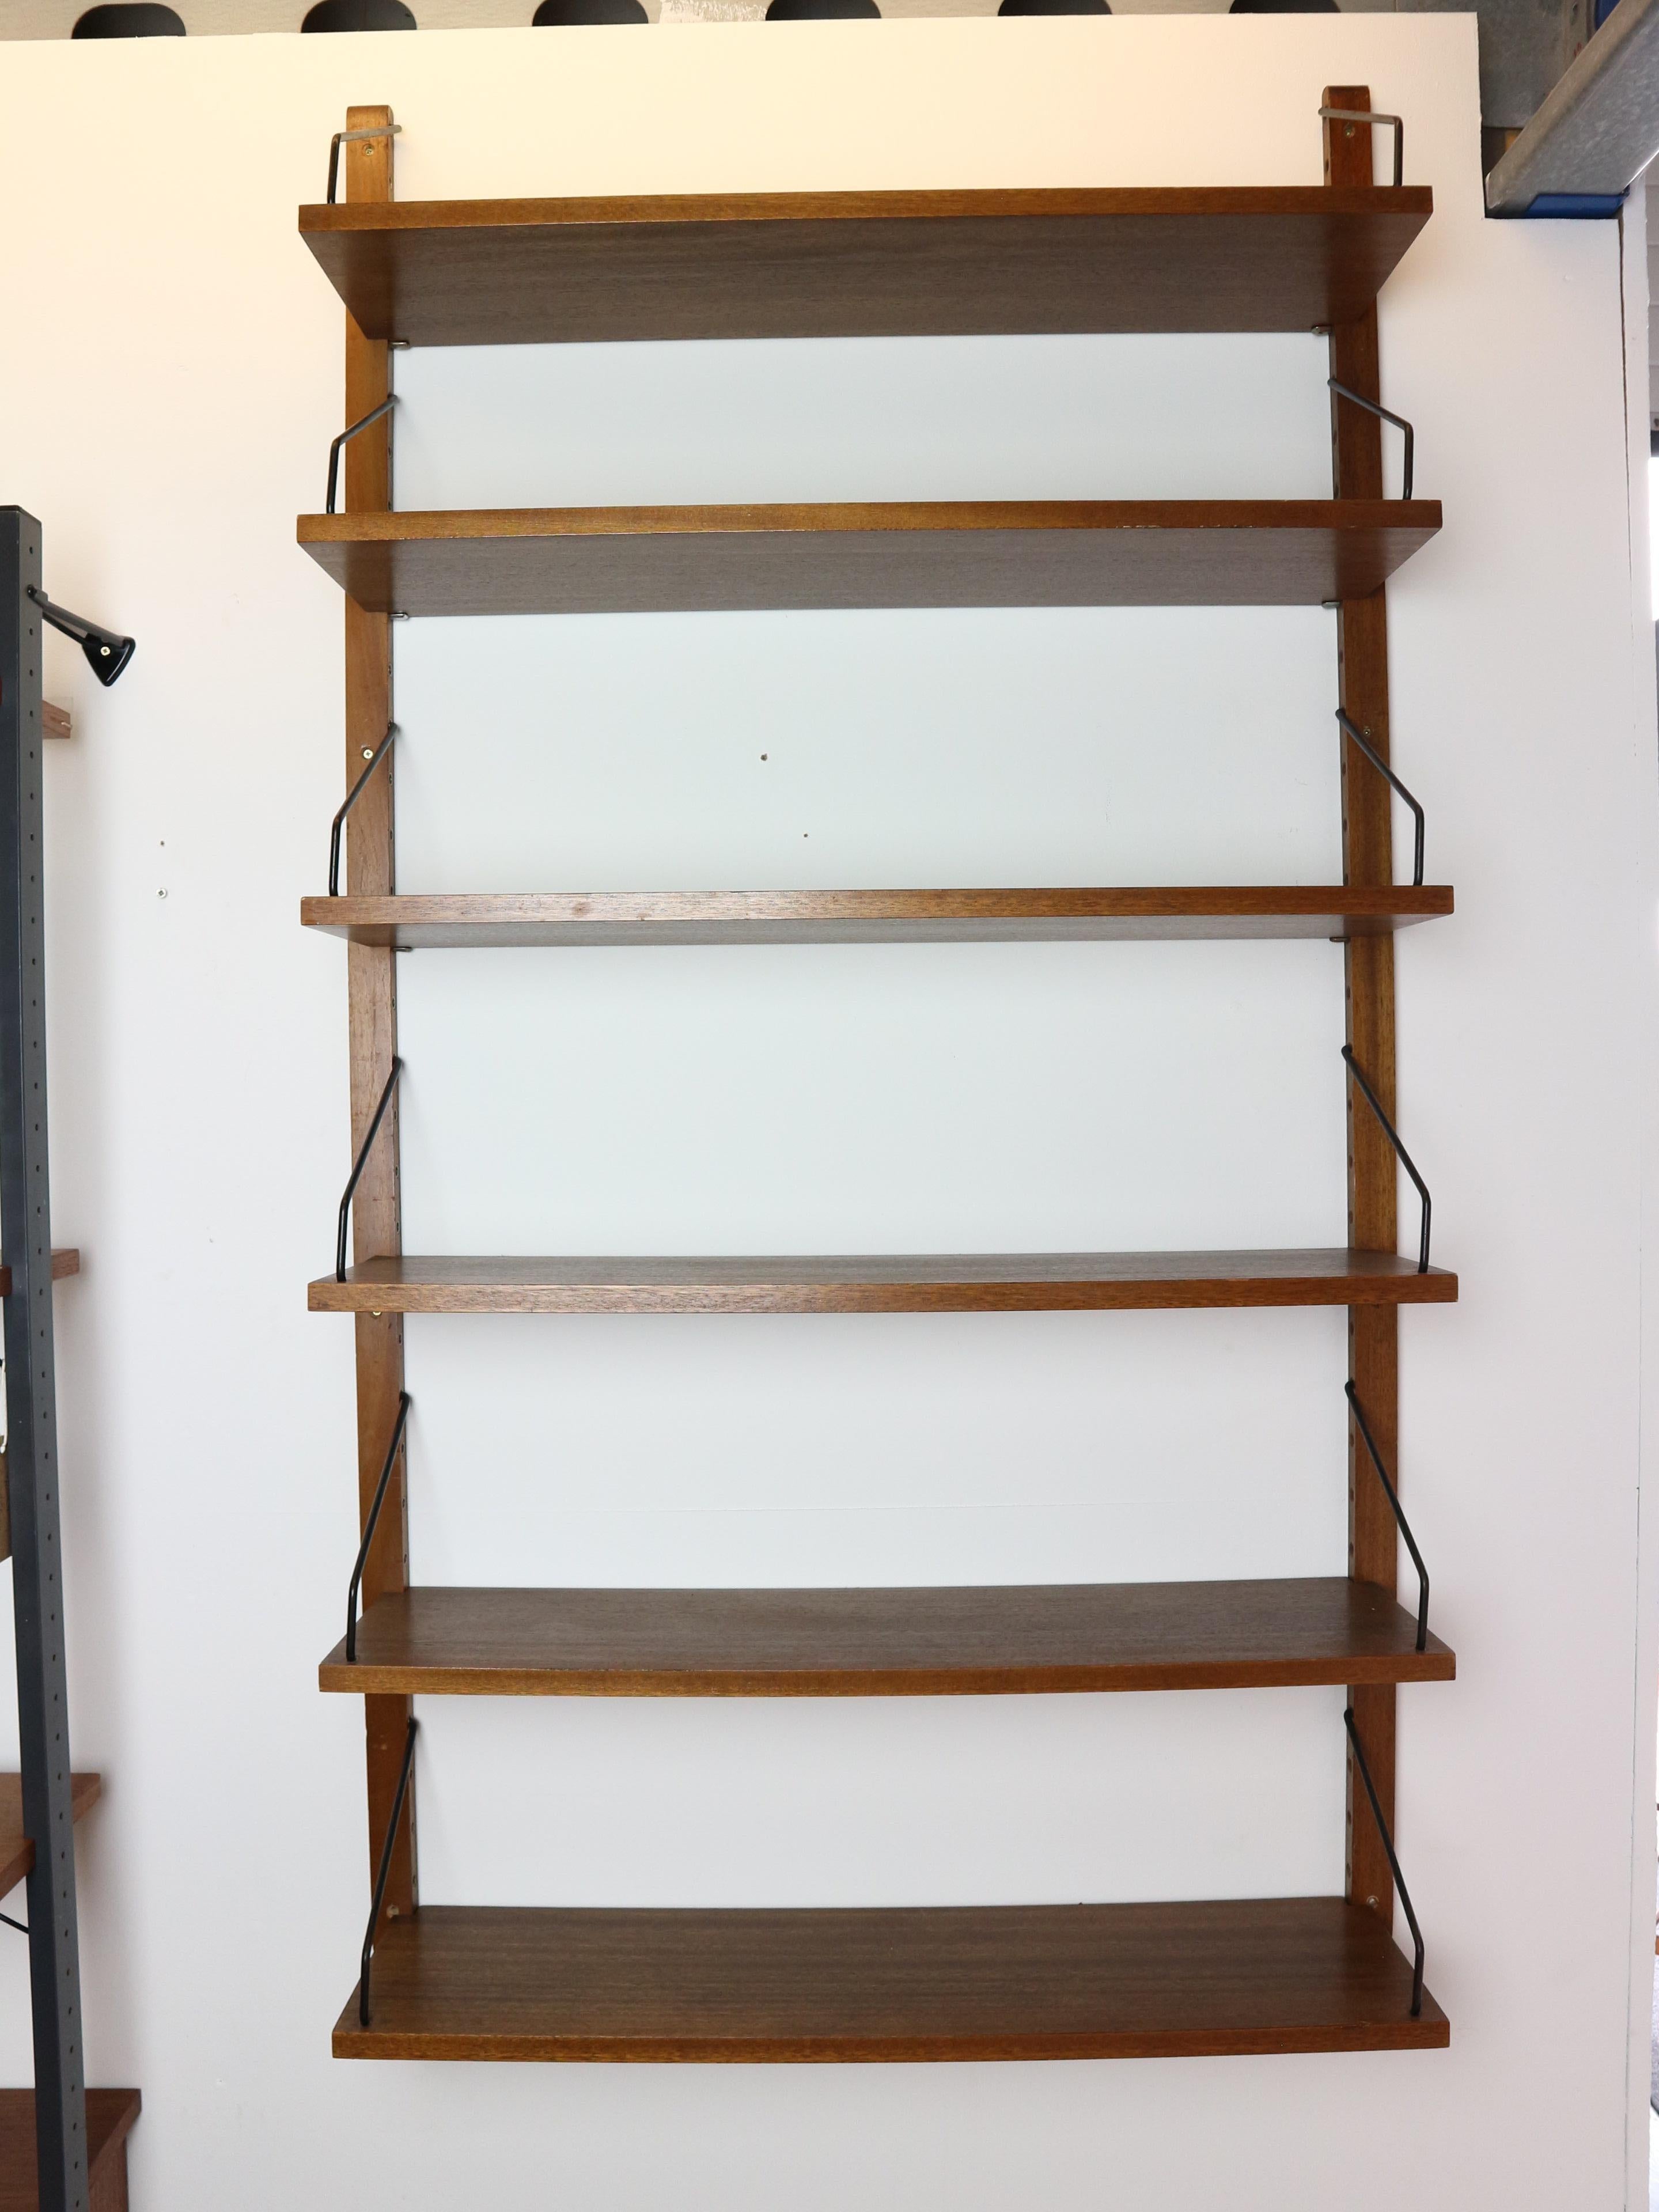 This Mid-Century walnut wall-mounted shelving system, made by Danish designer Poul Cadovius has interchangeable shelves mounted on wooden risers and black metal paginated brackets. 
The shelf can be used for books or other decoration/objects. 
When